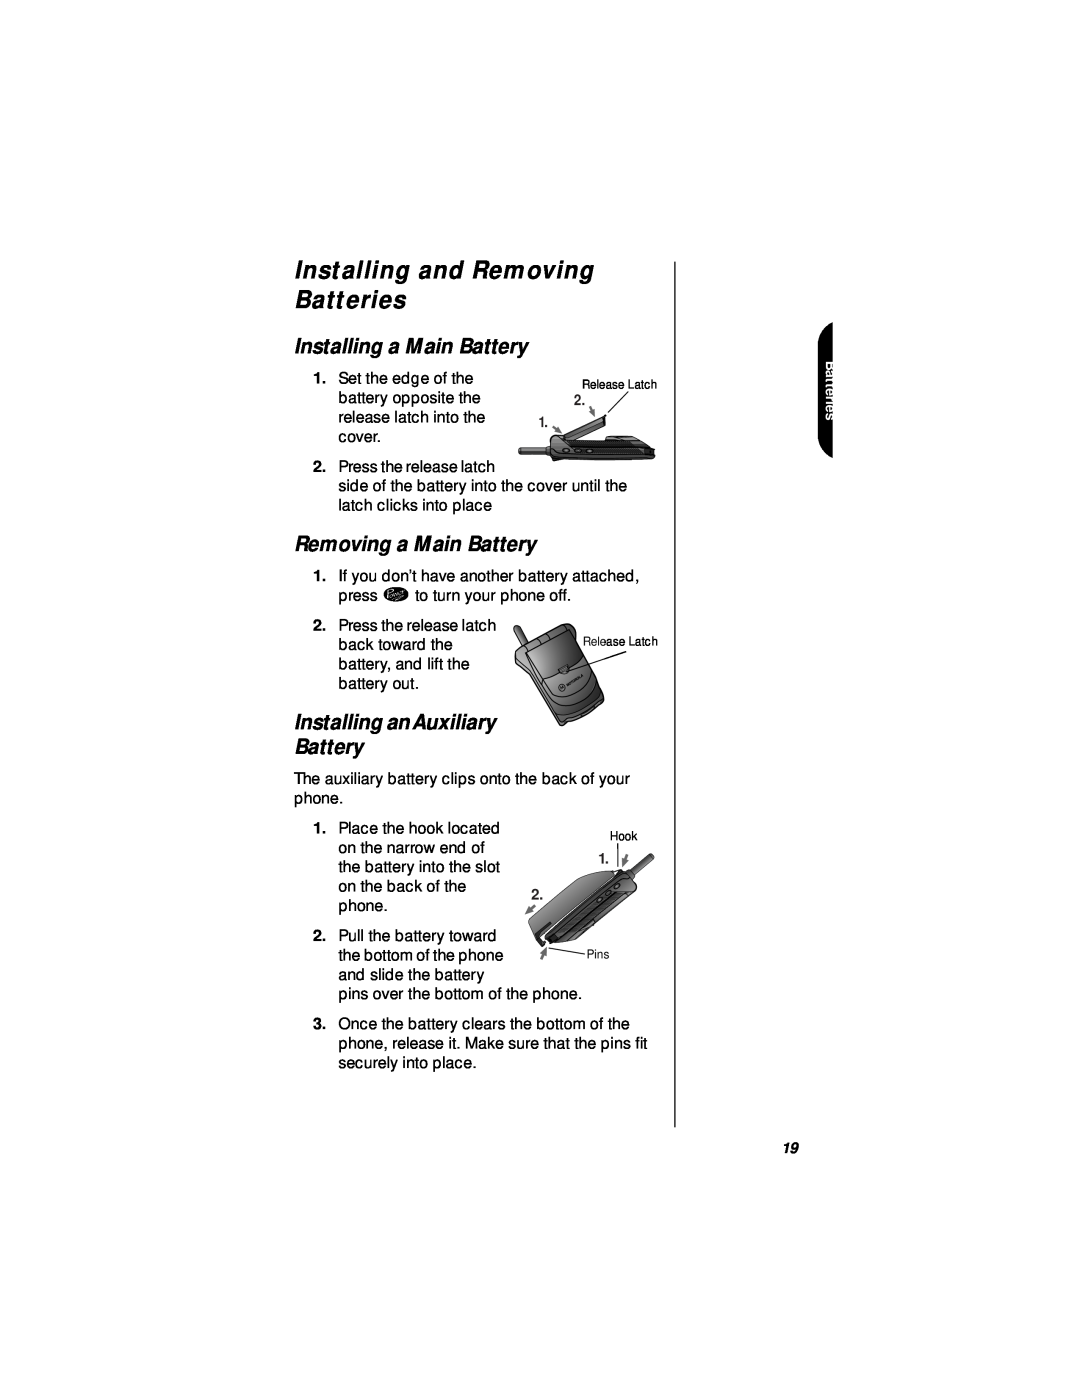 Motorola StarTAC specifications Installing and Removing Batteries, Installing a Main Battery, Removing a Main Battery 